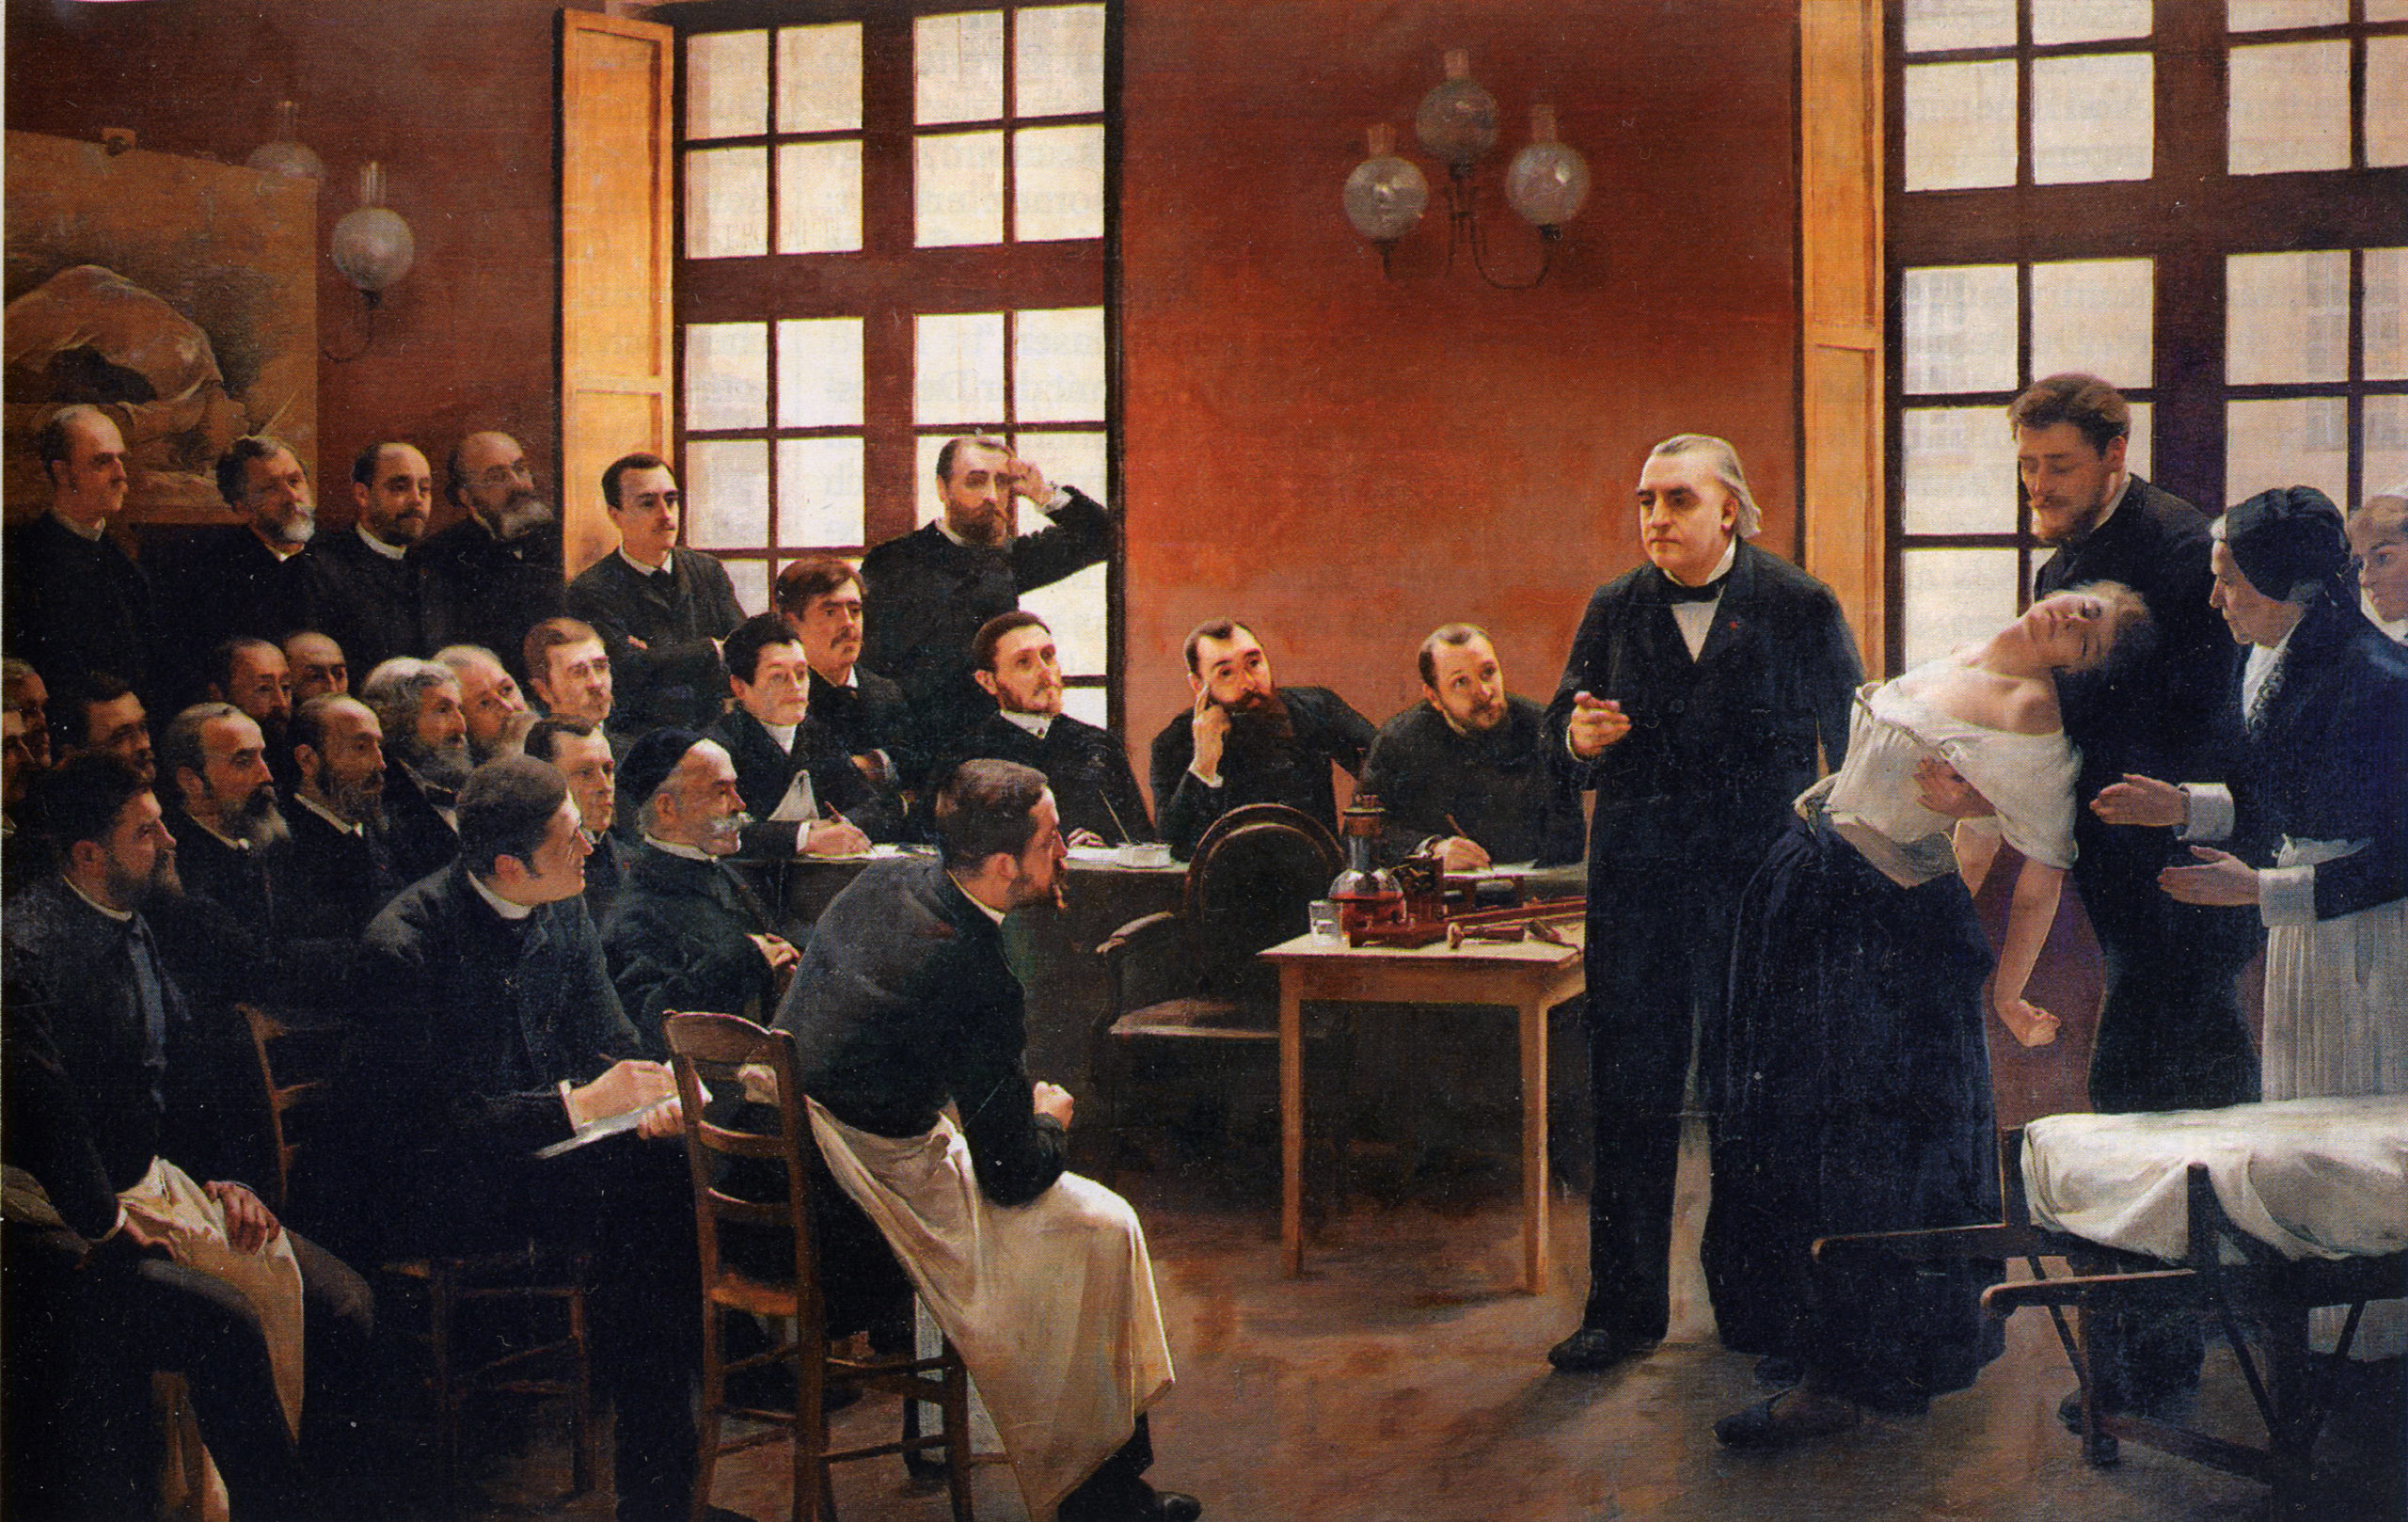 André Brouillet, Clinical Lesson at La Salpêtrière, 1887, oil on canvas, 290 x 430 cm (University of Paris). This painting of Jean Charcot demonstrating hypnosis hung in Freud’s study.